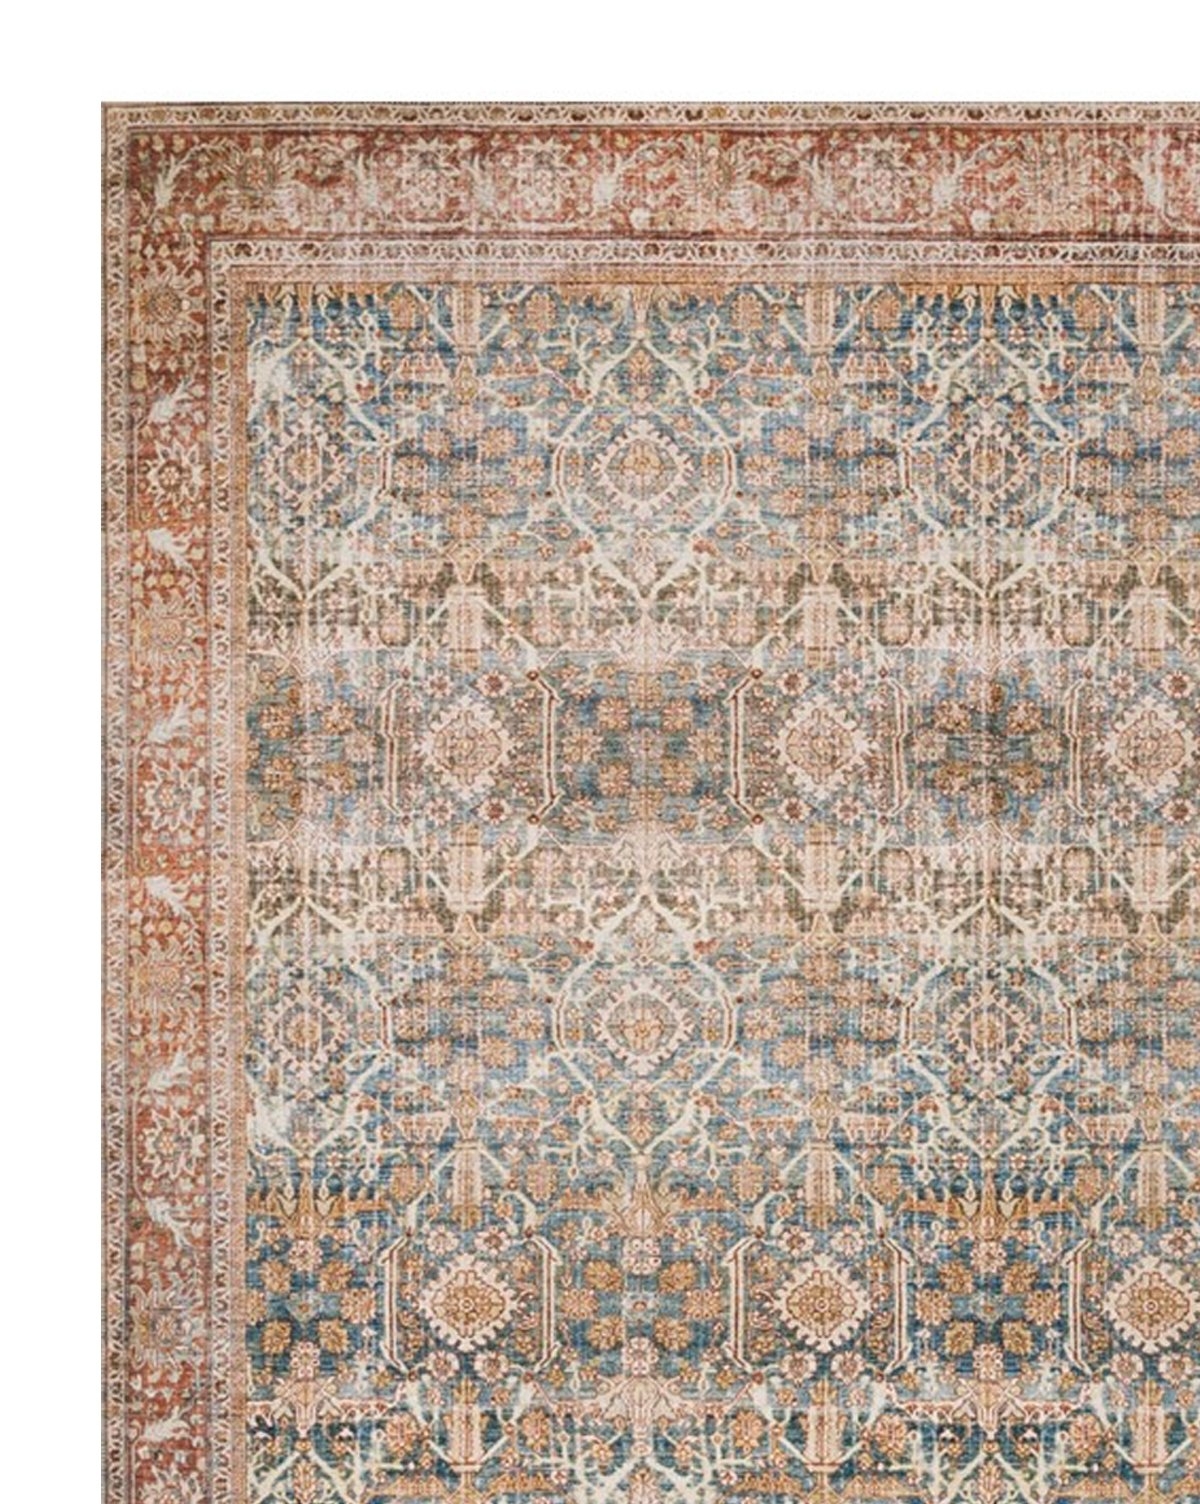 TUNIS PATTERNED RUG, 7'6" x 9'6" - Image 1